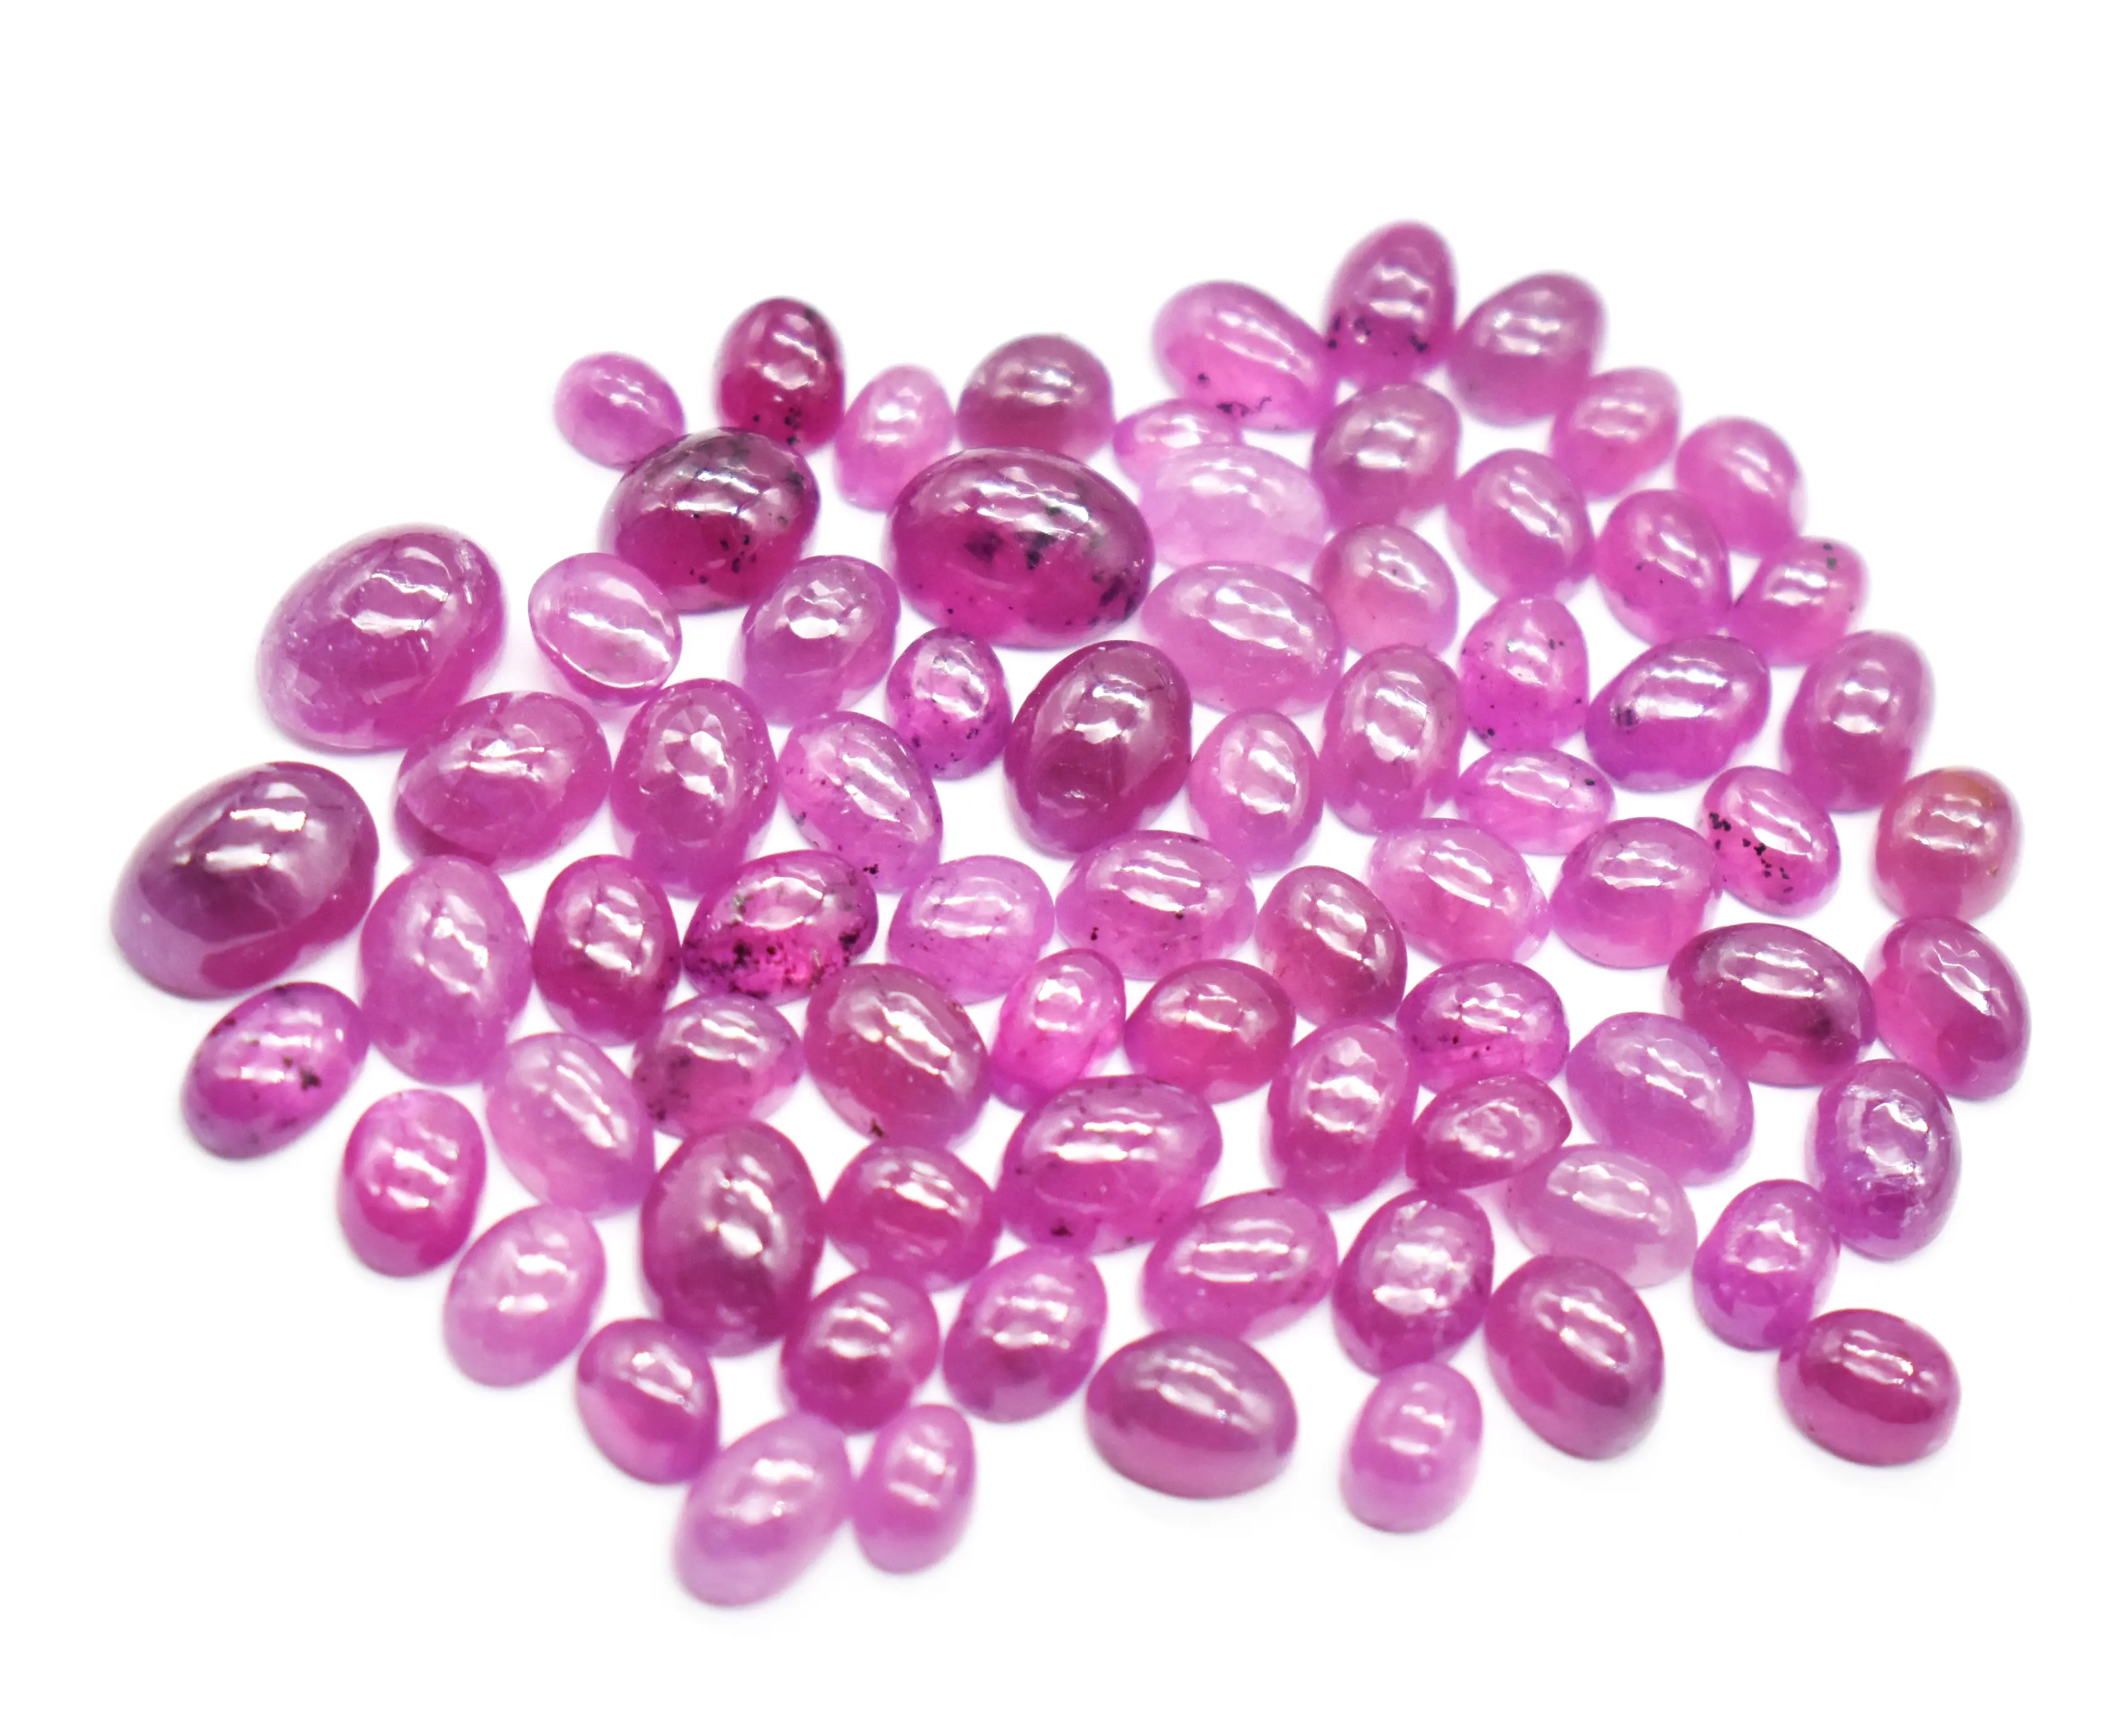 Natural Ruby Oval Cabochon Flat Back Unheated Untreated 5x3 mm 6x4 mm 7x5 mm 8x6 mm ( More Sizes Are Available )